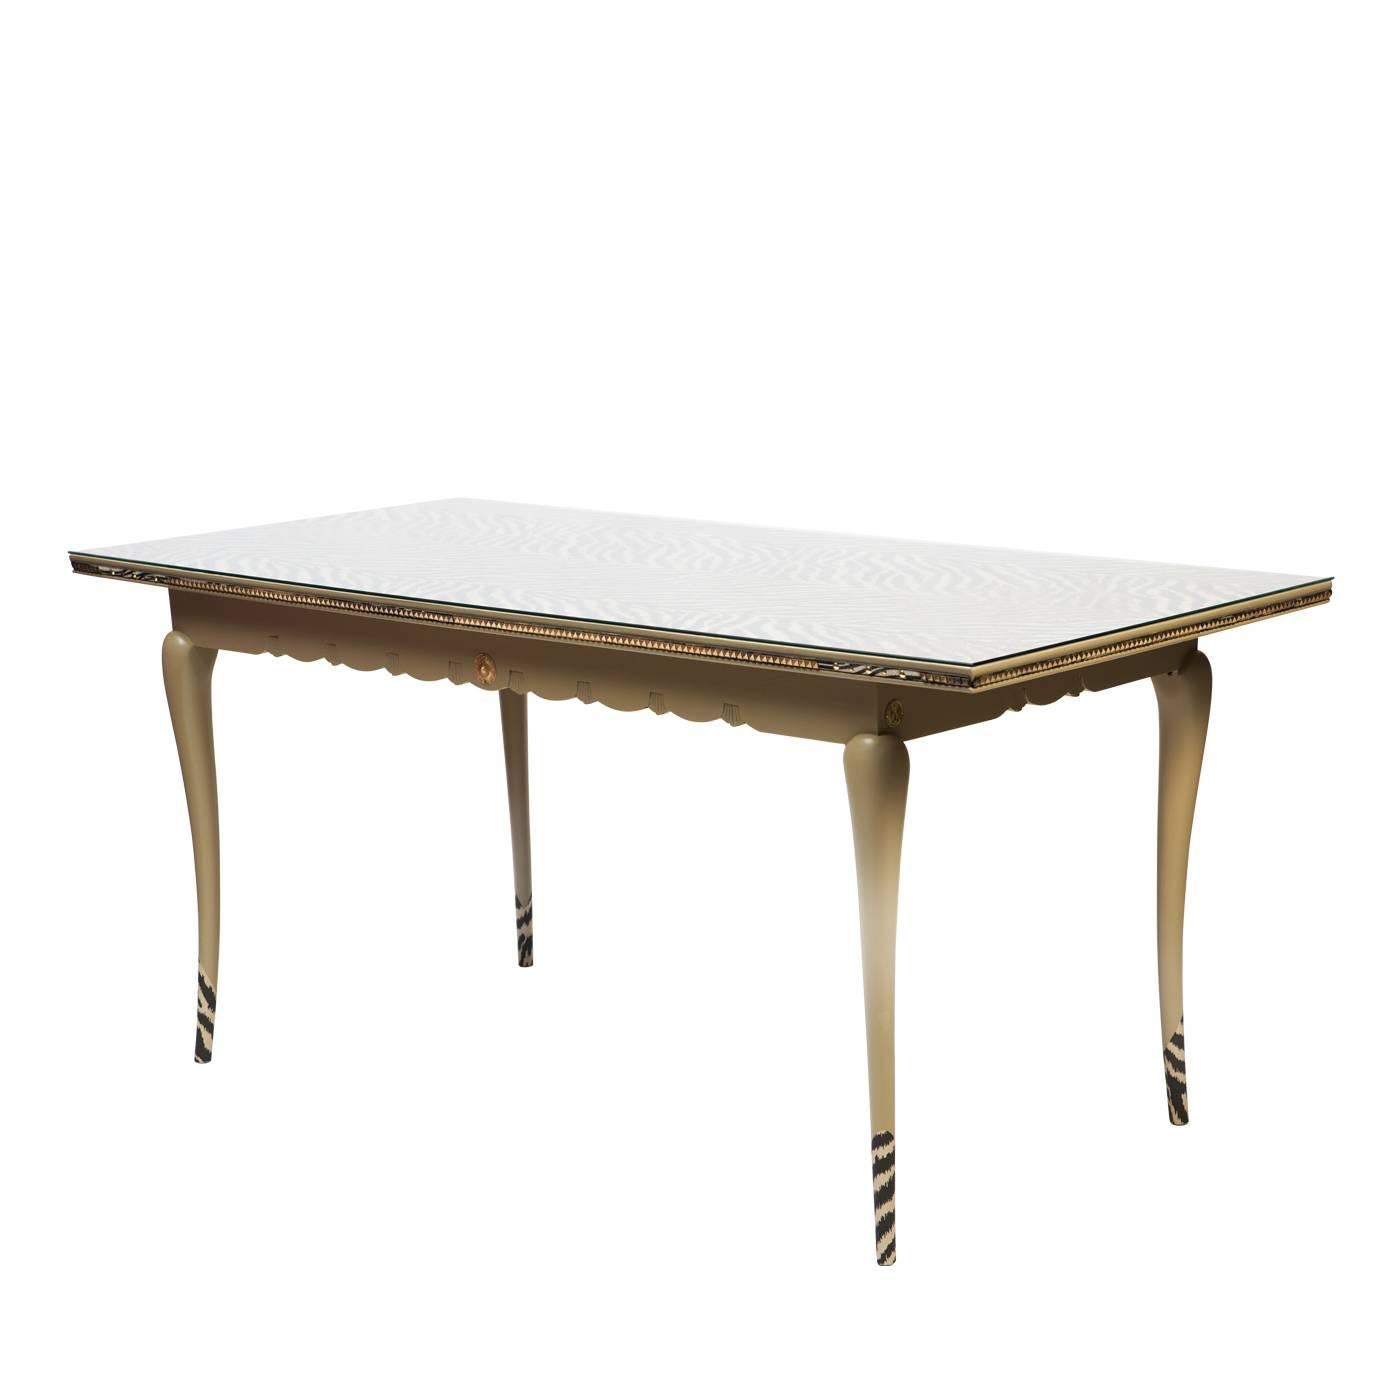 Zebralace Table